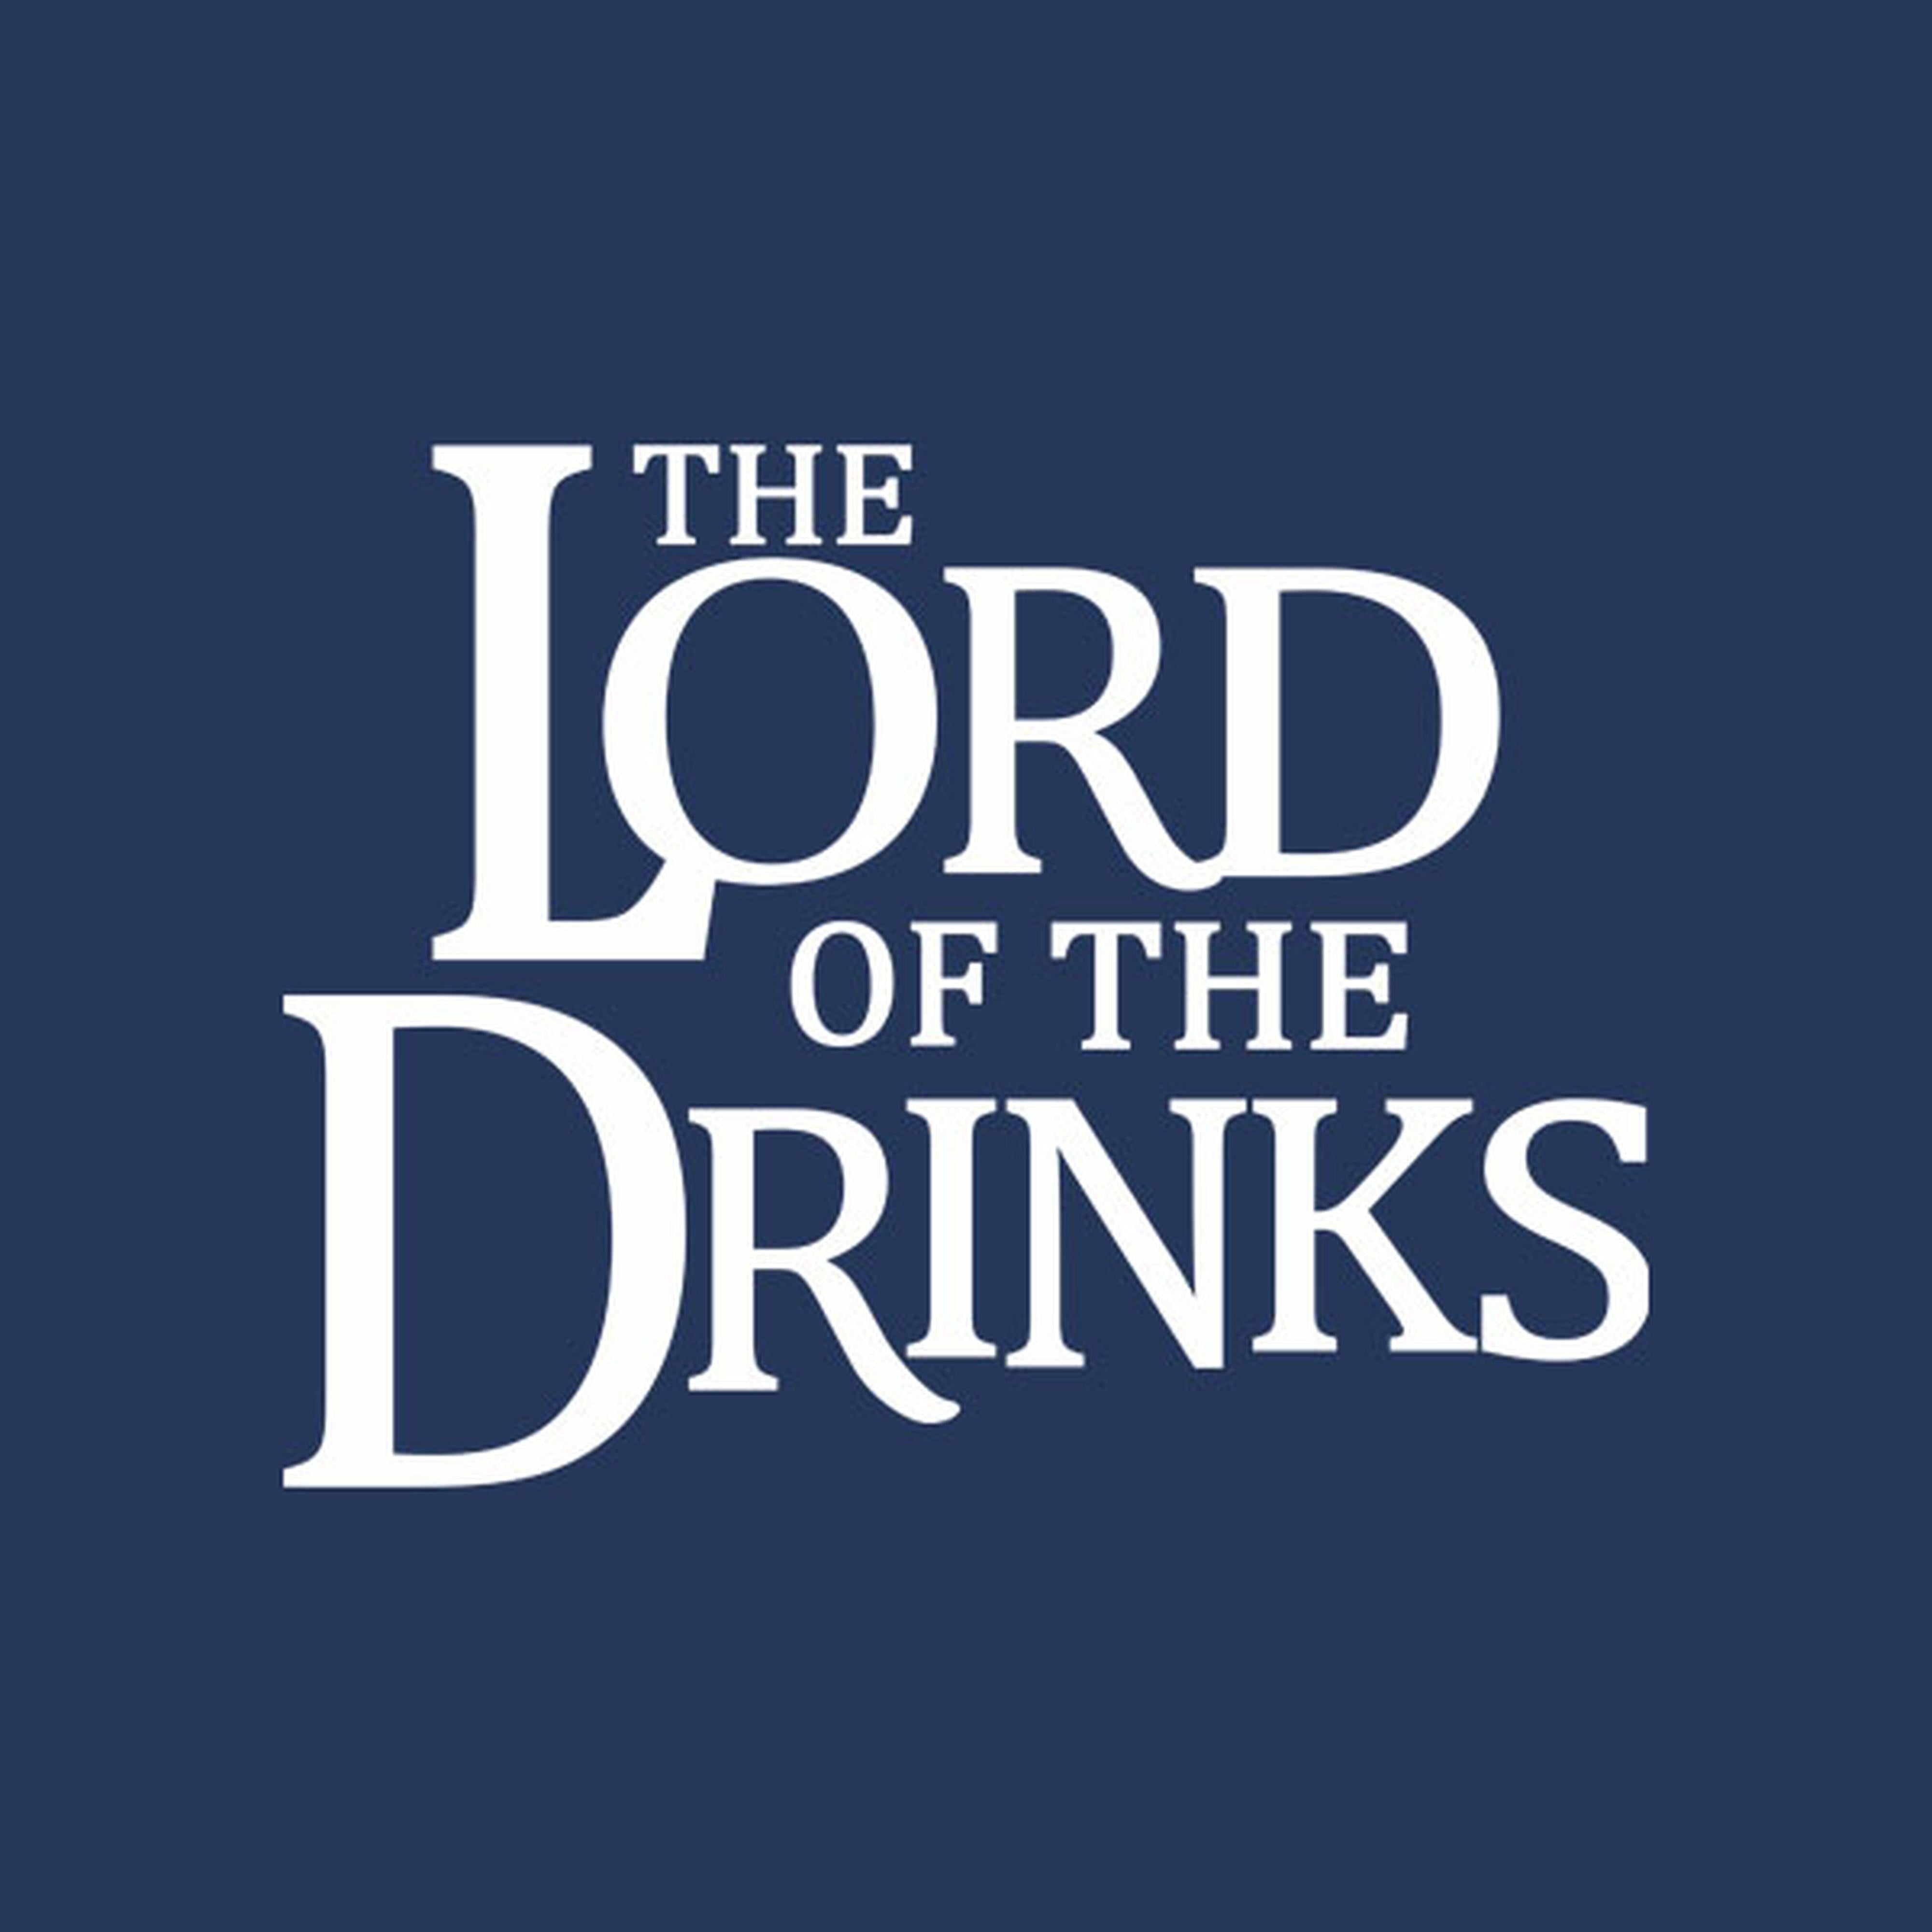 The Lord of the Drinks - T-shirt